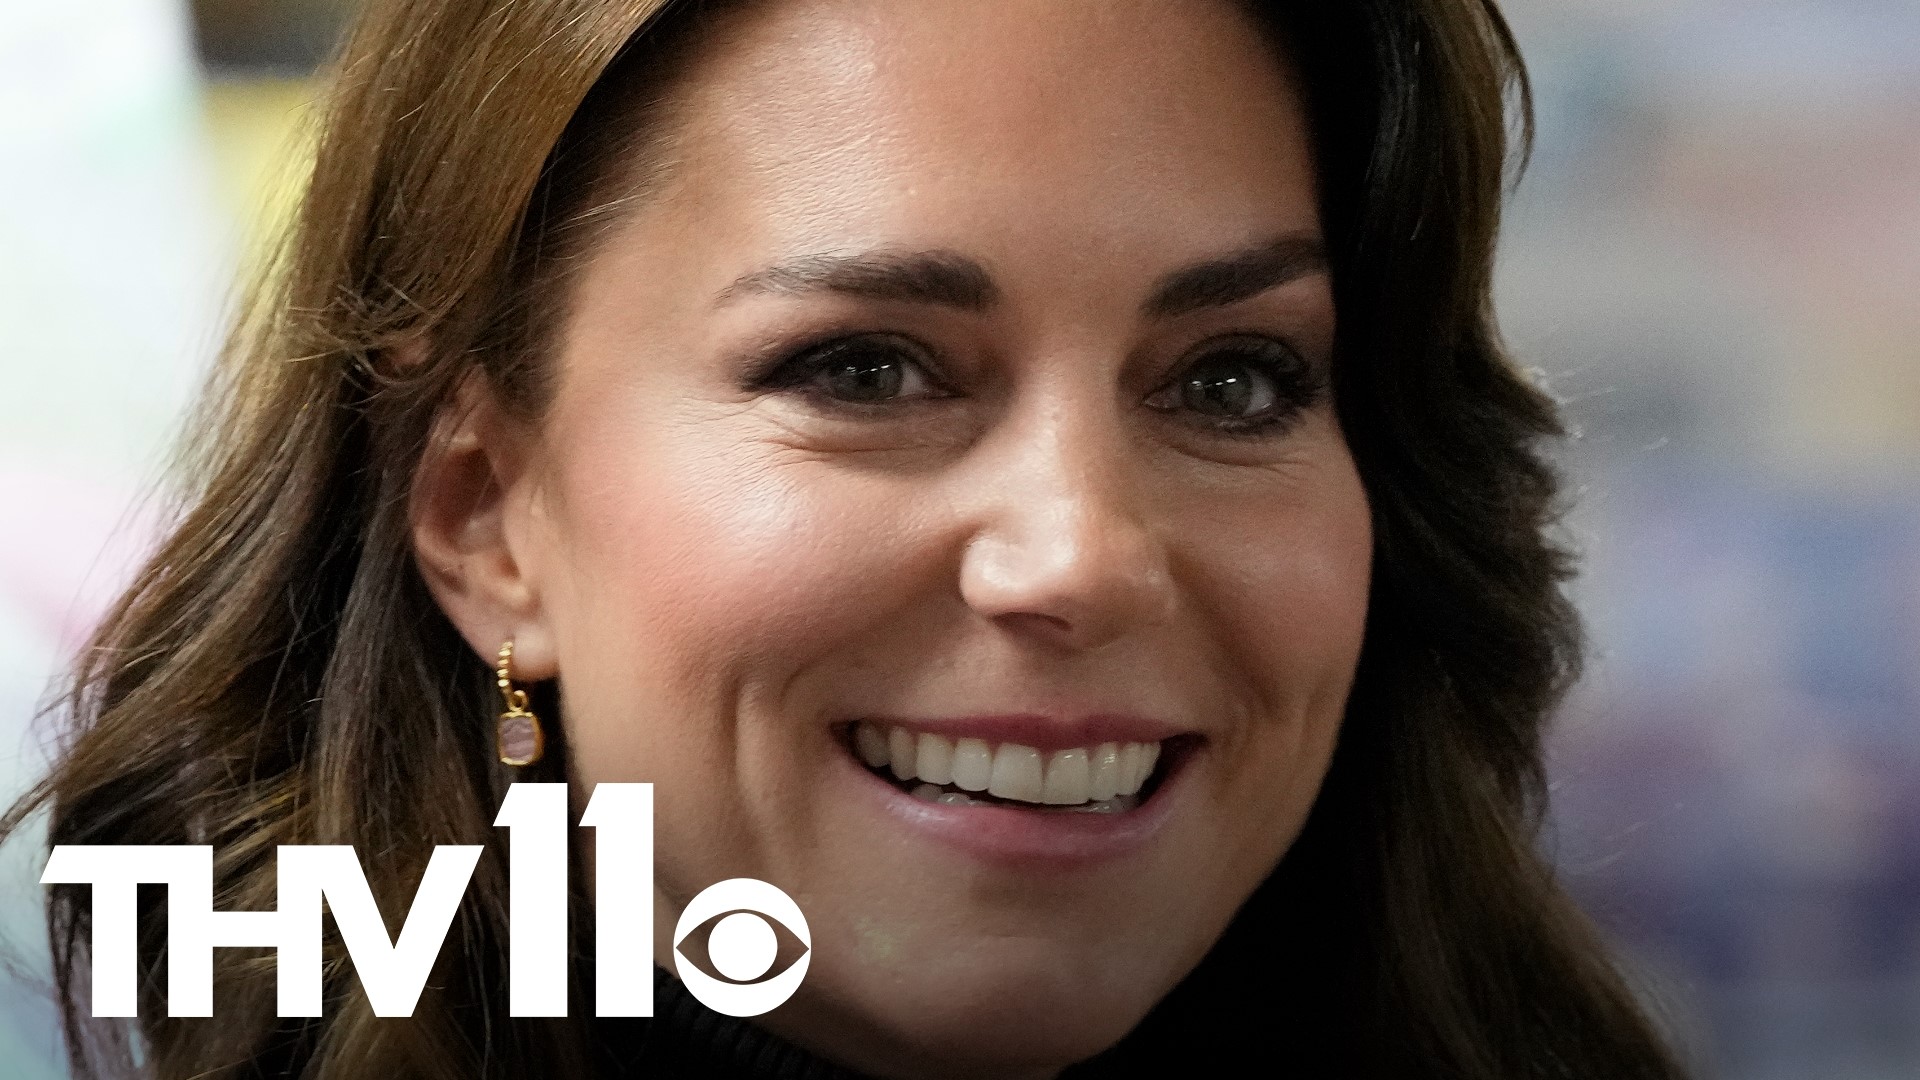 News of Kate's diagnosis comes just months after King Charles III announced he had cancer.